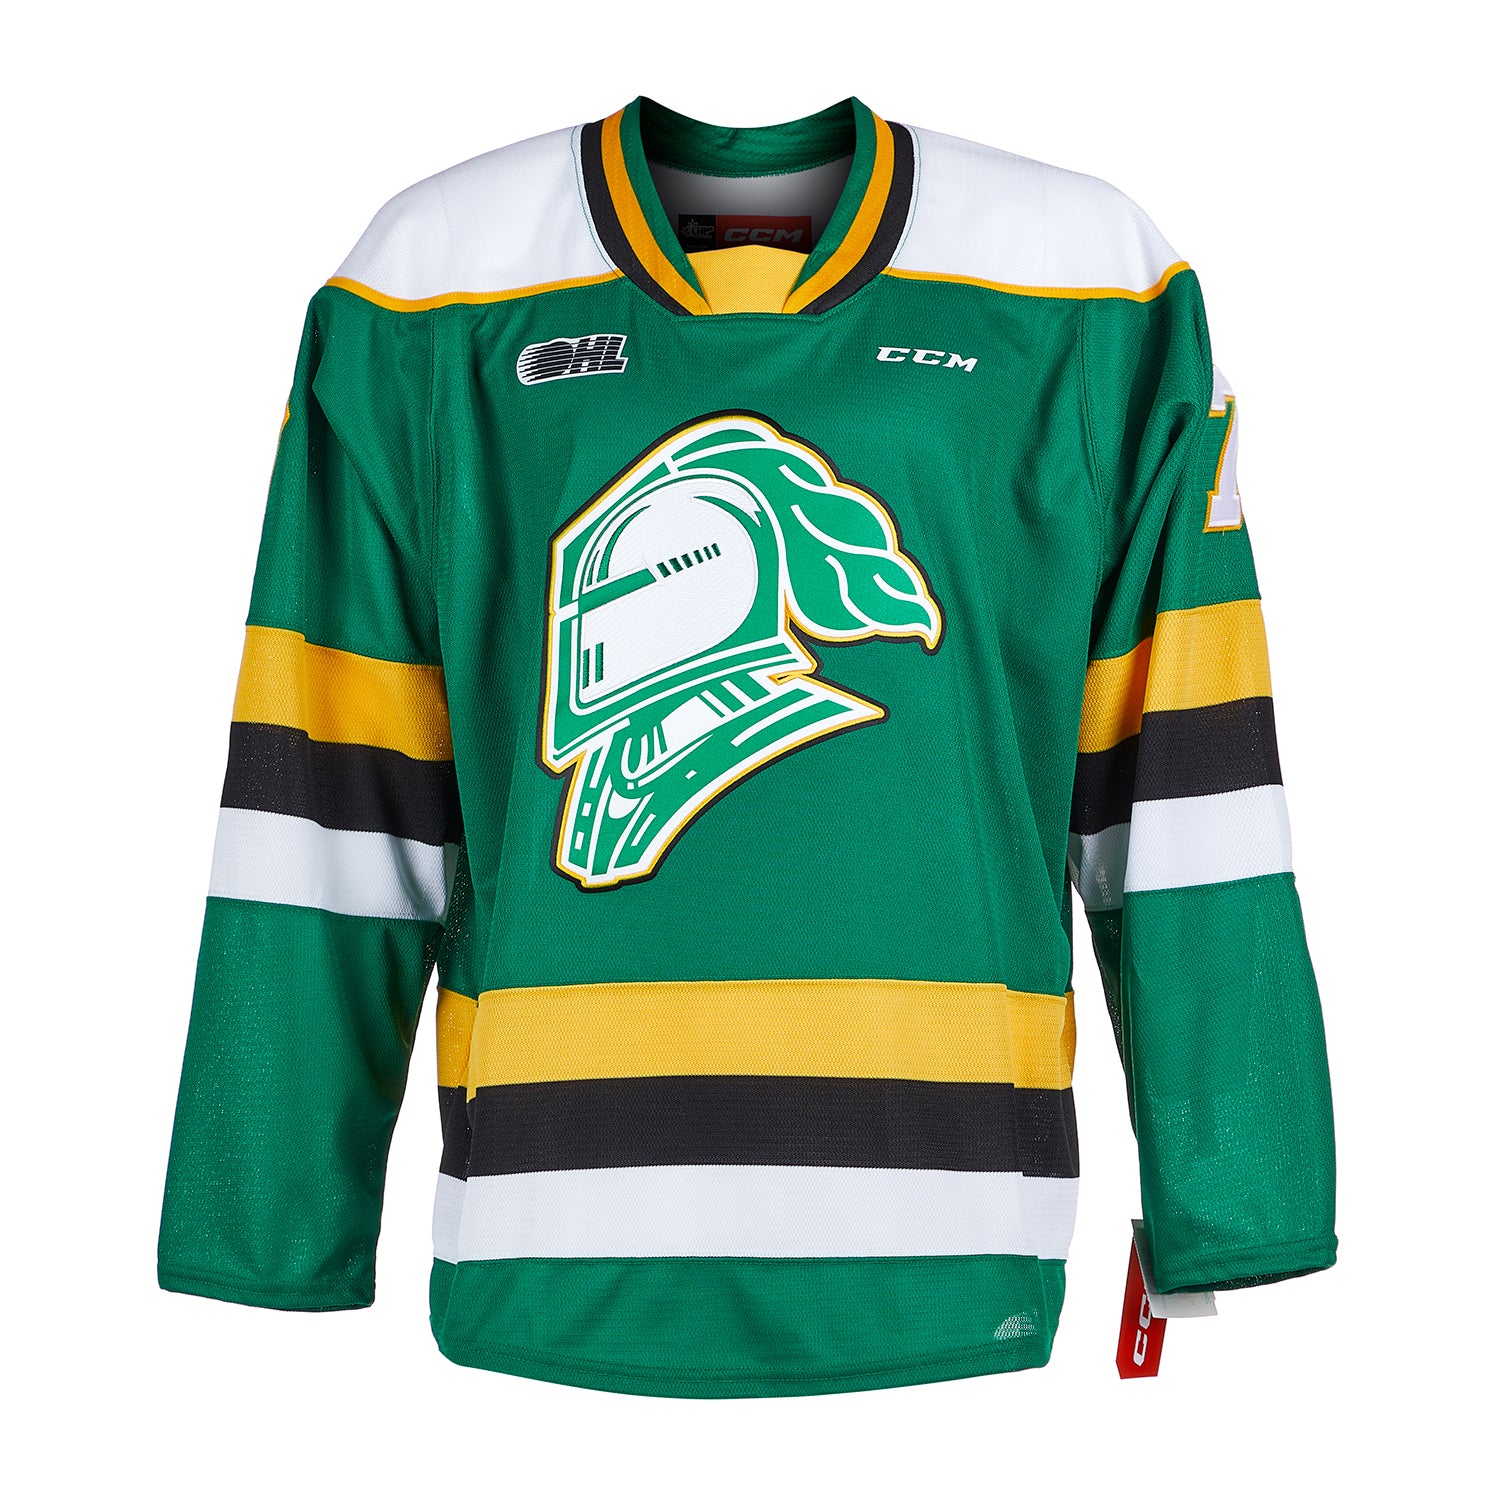 Mitch Marner London Knights Autographed CCM Replica CHL Hockey Jersey - NHL  Auctions